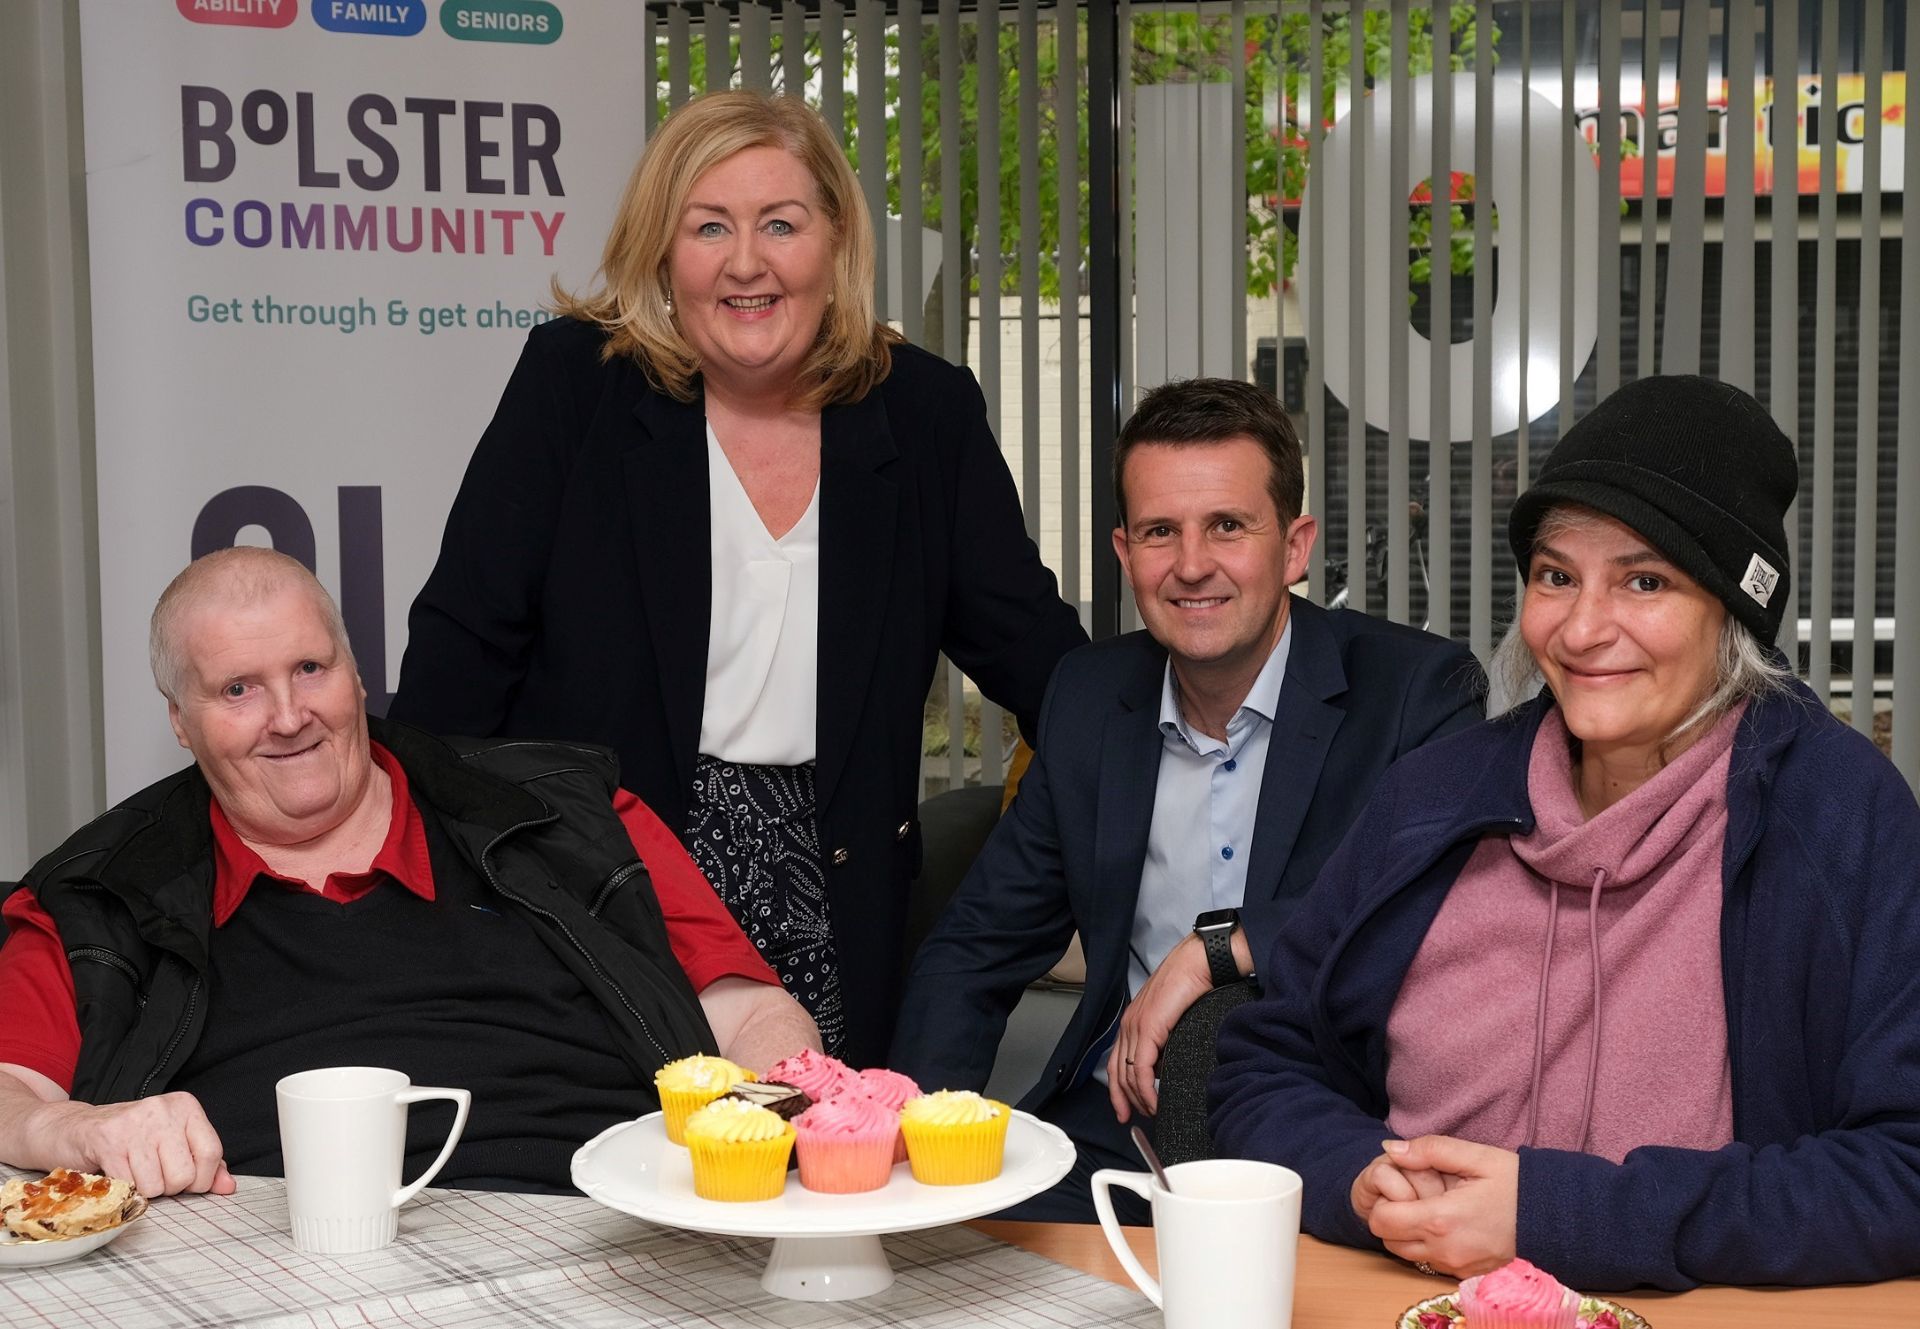 Bolster Community receives Bank of Ireland funding to support    seniors with cost of living